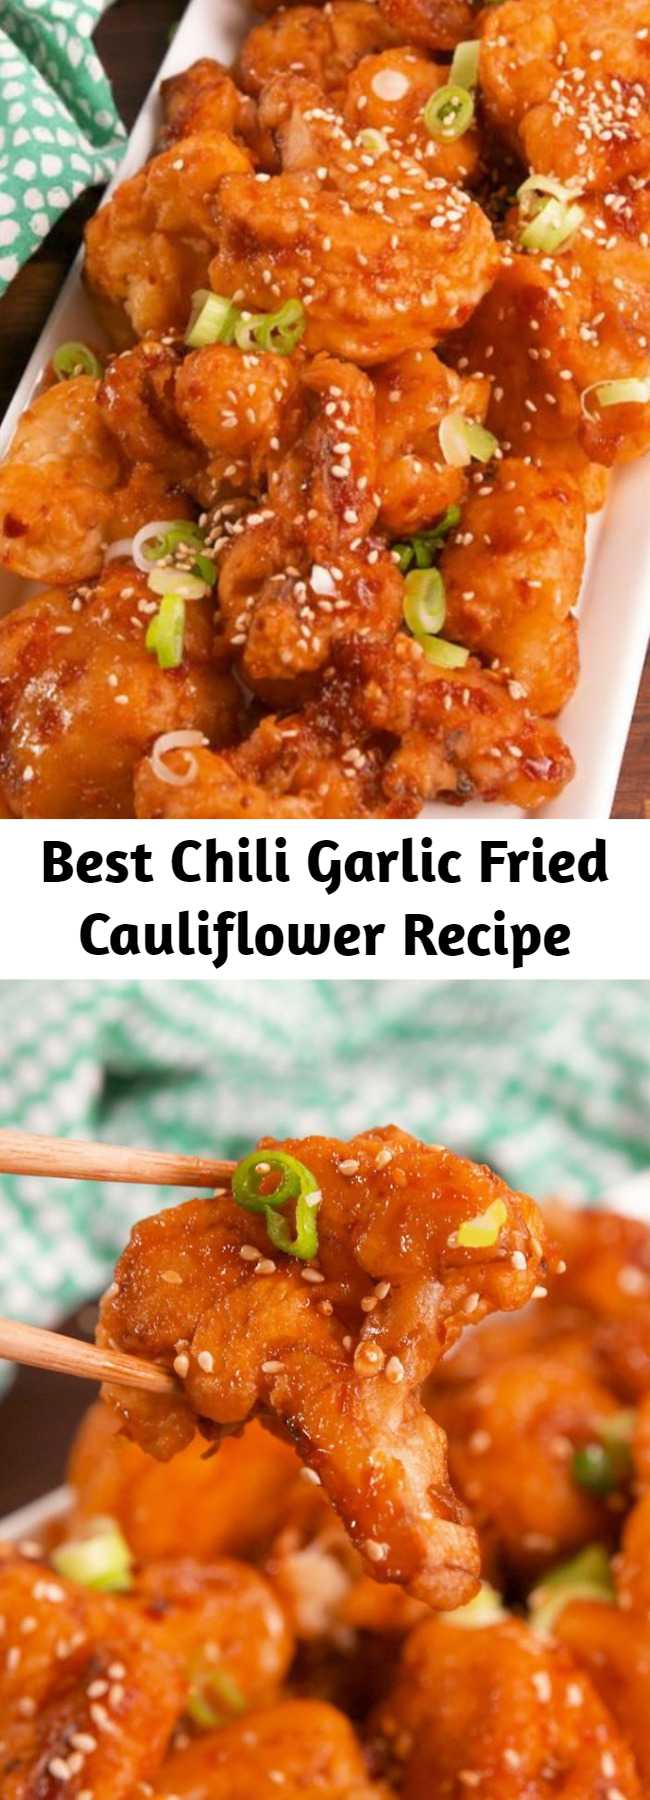 Best Chili Garlic Fried Cauliflower Recipe - The cauliflower florets are battered in somewhat of a tempura-like batter, which aids in more wing-like crispy coating. Eat it right away! The crunch factor diminishes quickly! #food #easyrecipe #vegetarian #familydinner #dinner